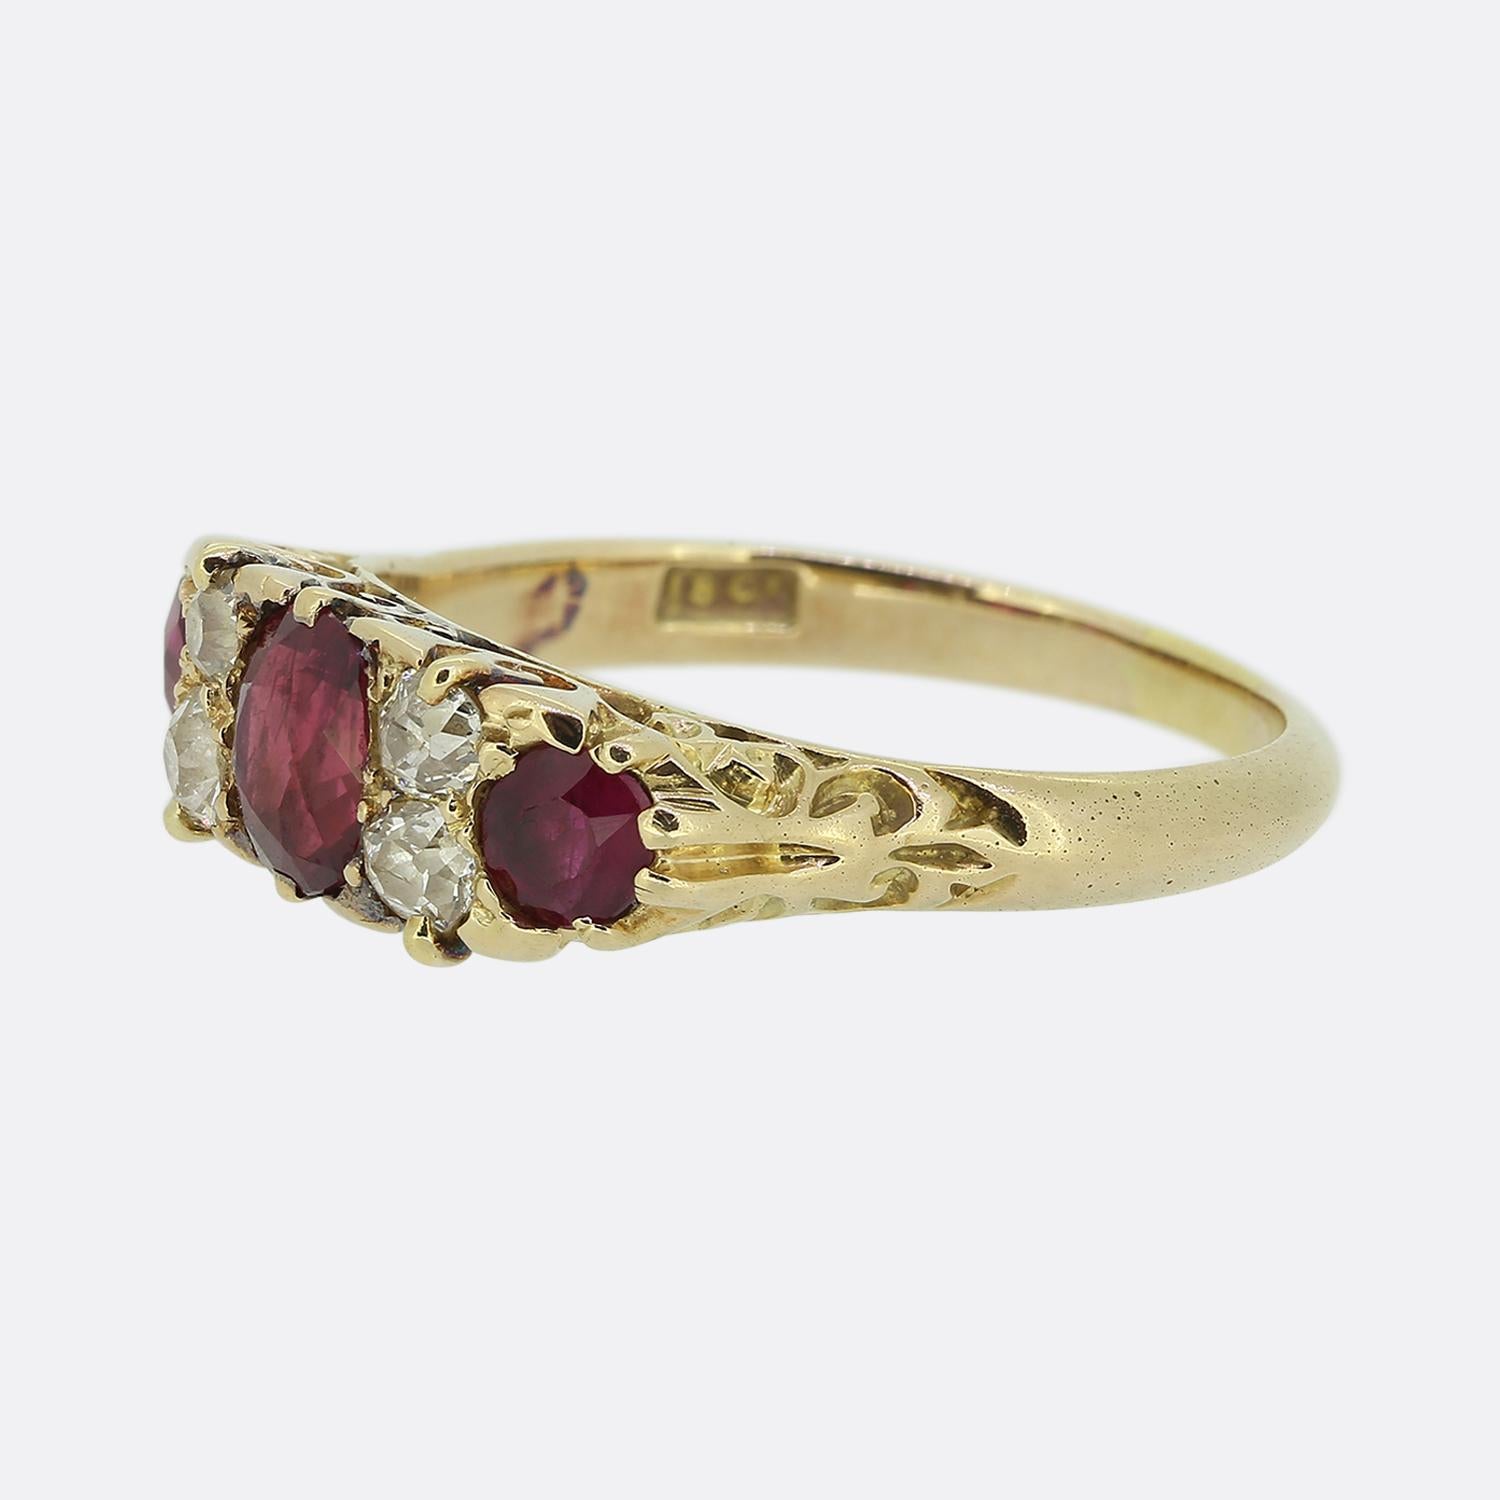 Here we have a classically styled three-stone ruby and diamond ring. This antique piece has been crafted from 18ct yellow gold and showcases a trio of rich red rubies; the largest of which sits at the centre. These focal stones are separated and